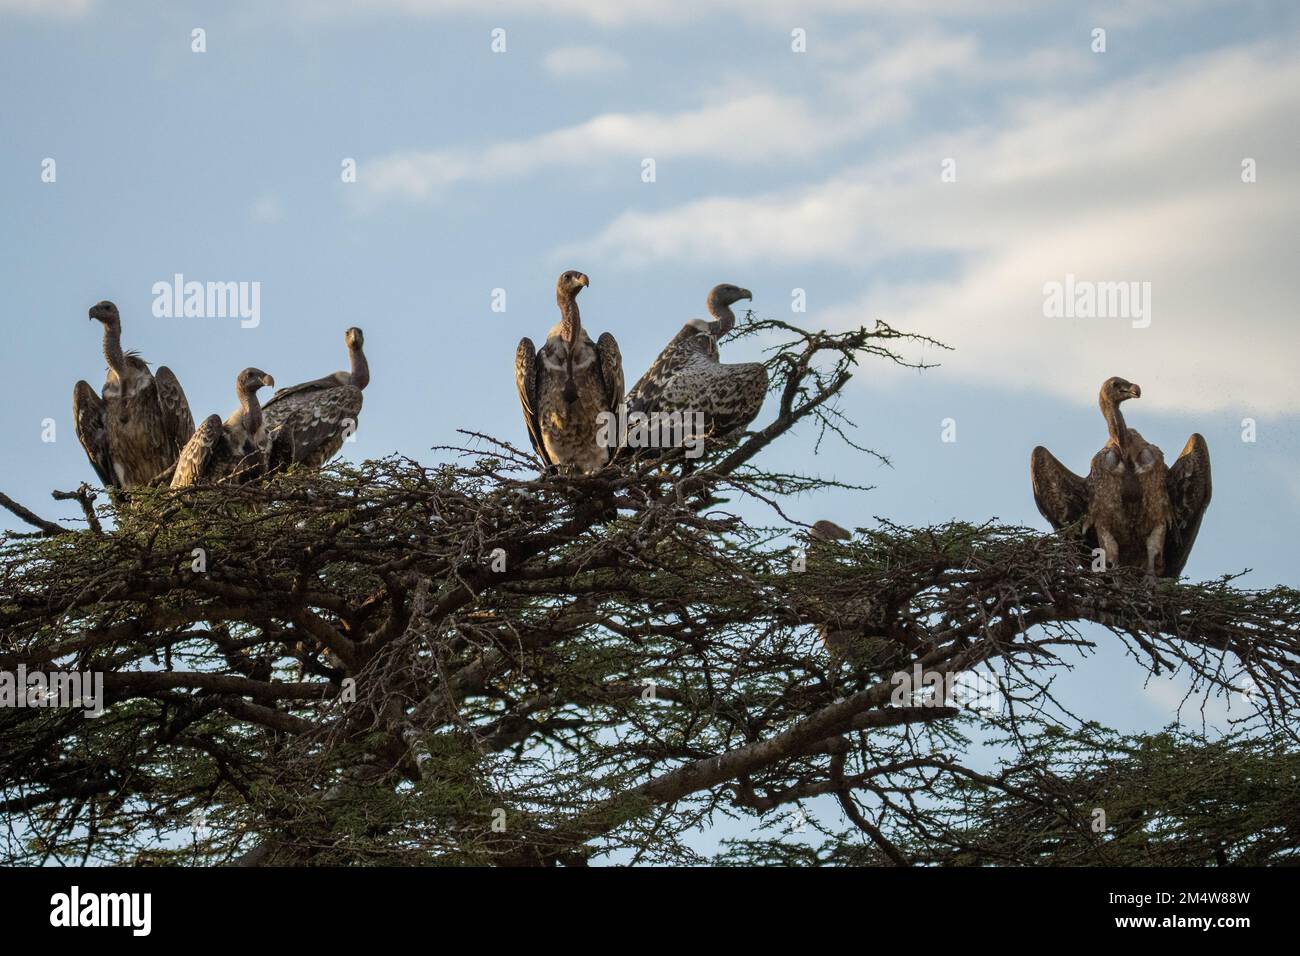 Ruppell's vulture (Gyps rueppellii) on a treetop. This large vulture, also known as Rupell's Griffon, inhabits arid and semi-arid parts of central Afr Stock Photo